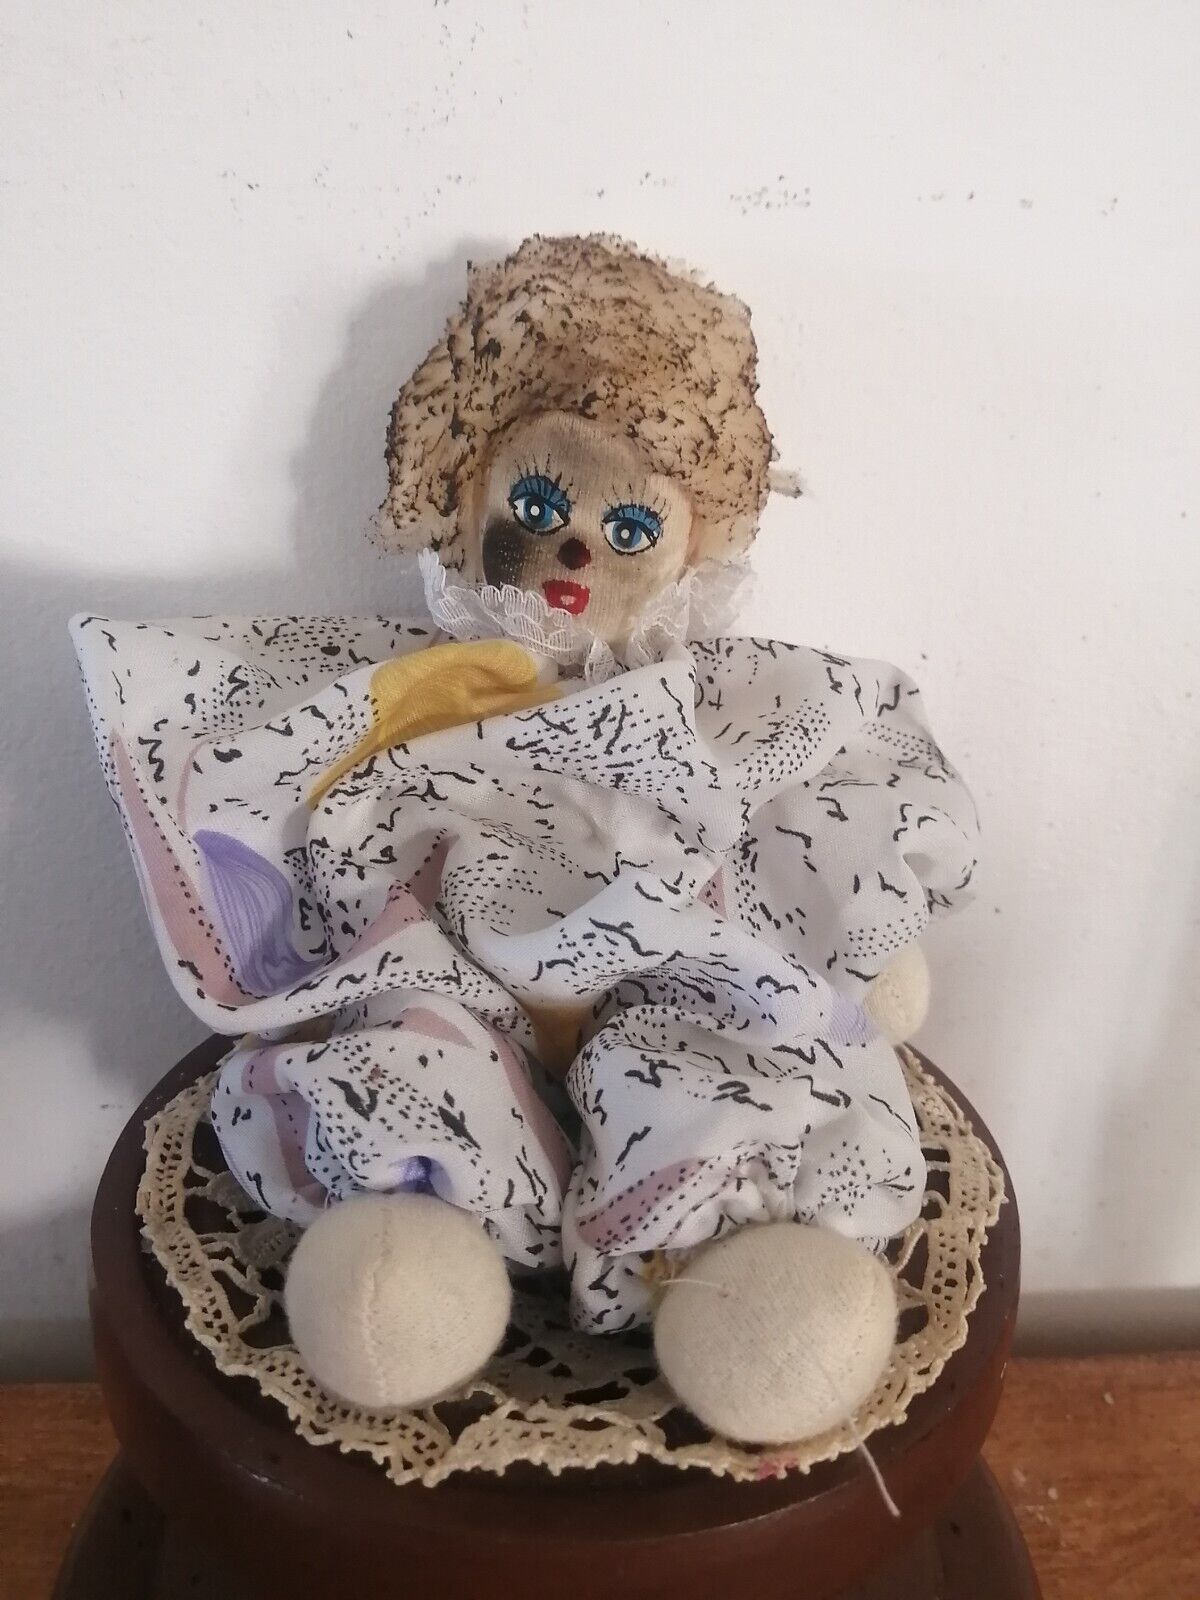 Haunted Vintage Clown Doll, Negative Entity, Not A Toy